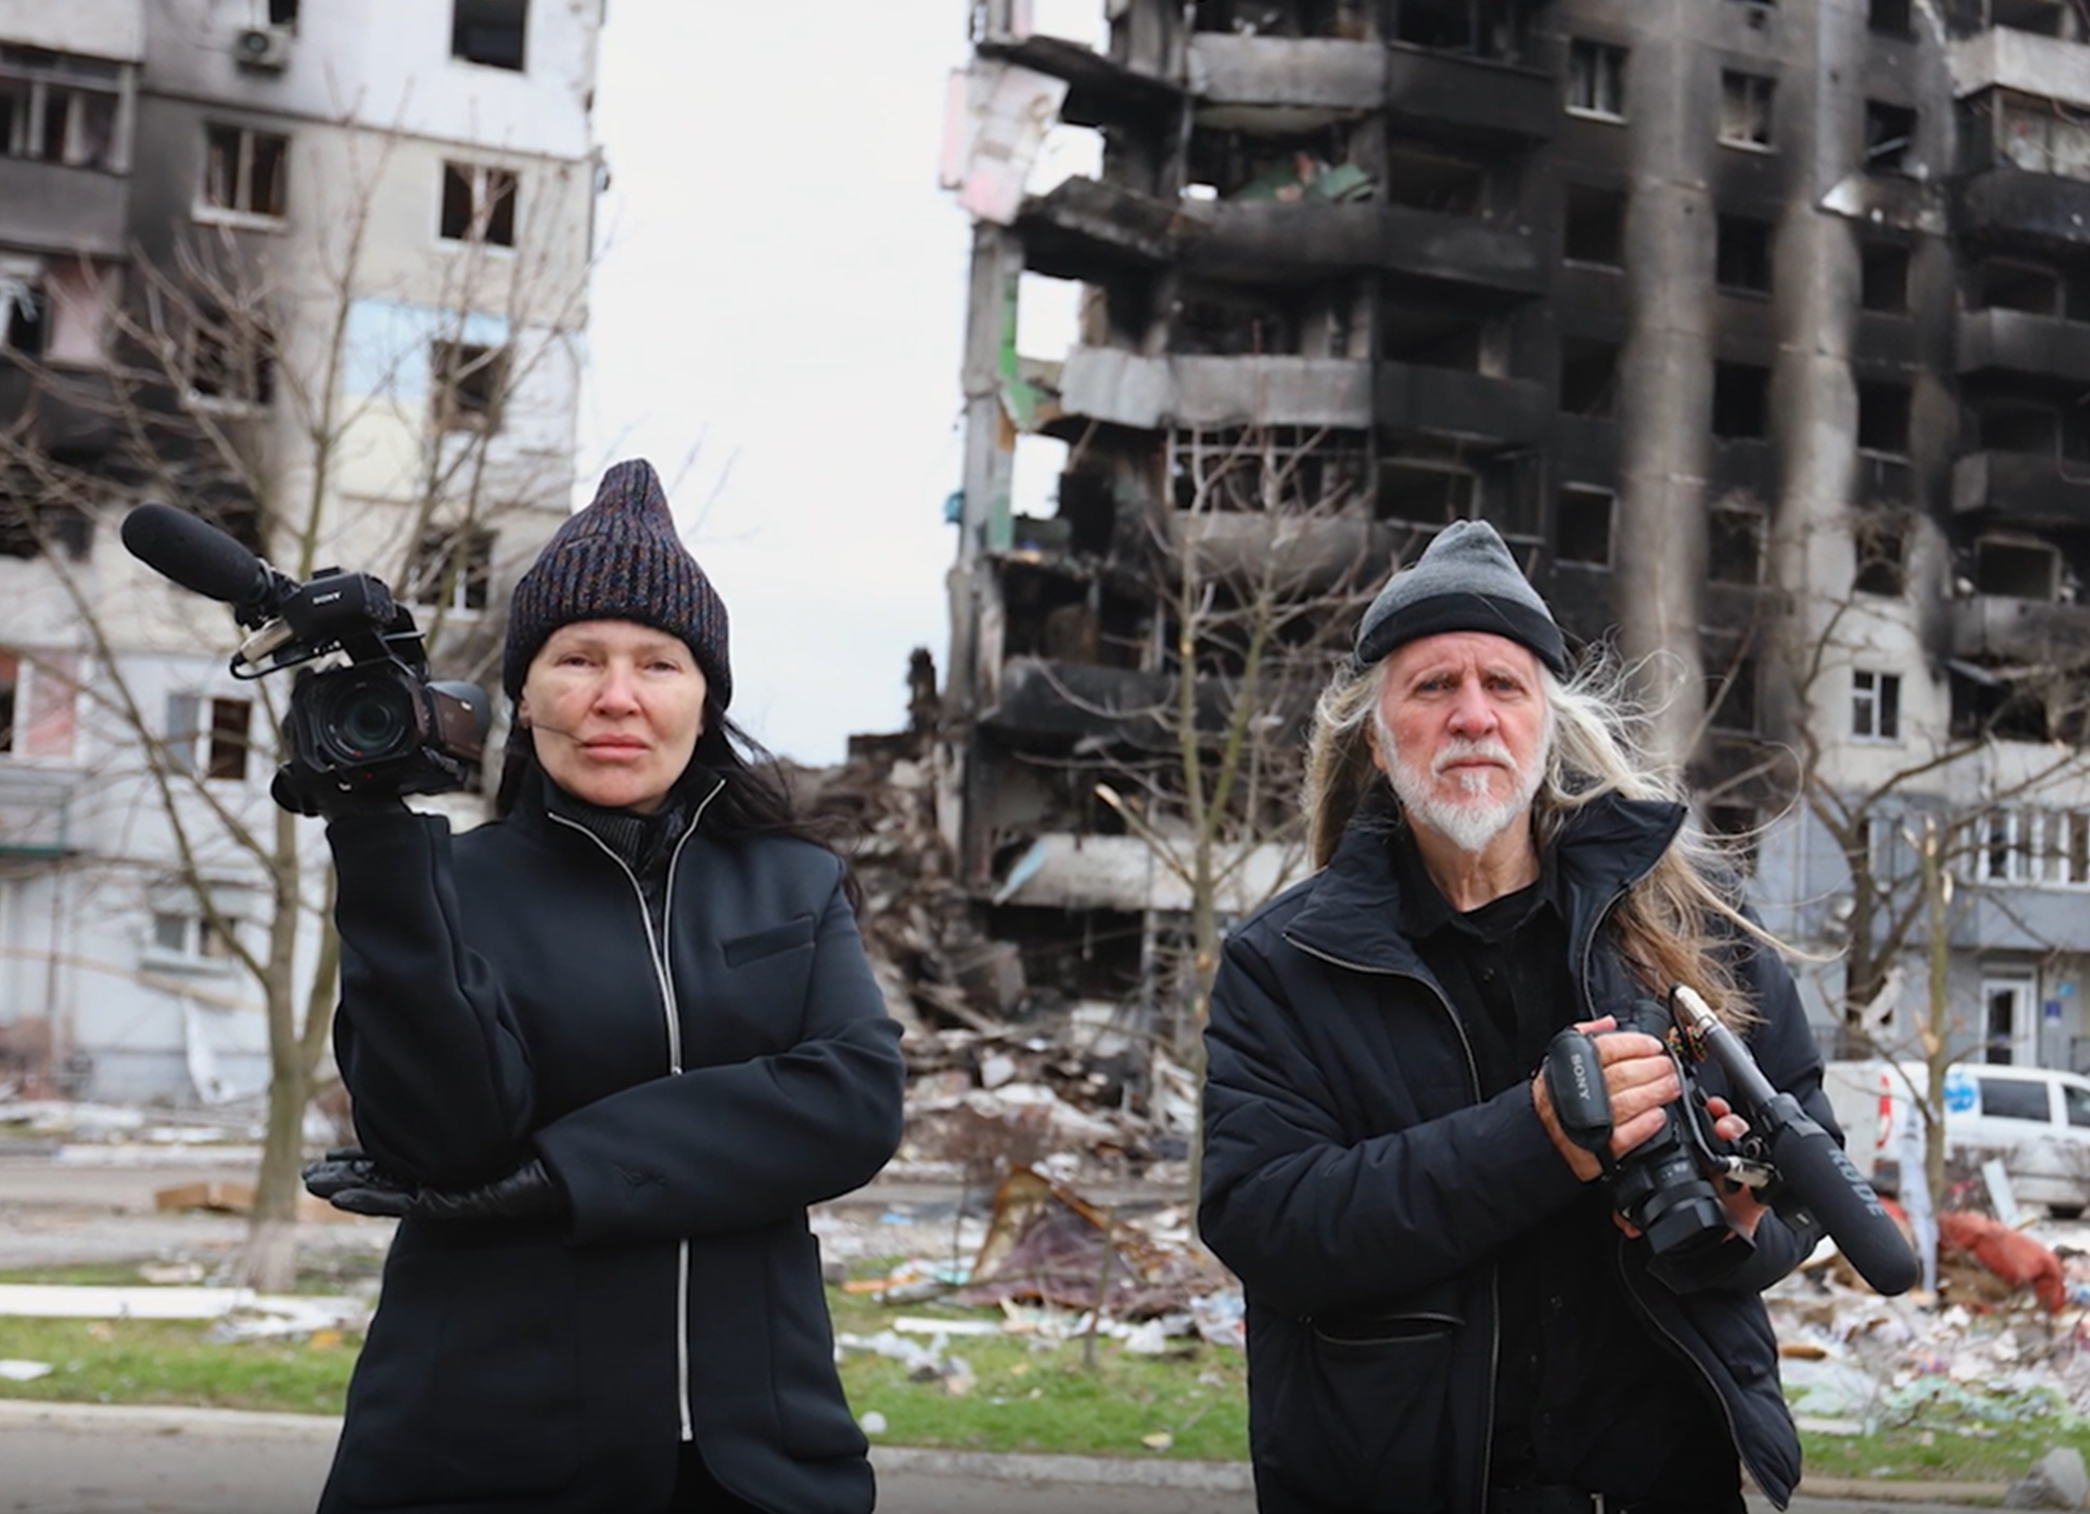 Join us for a screening of George Gittoes and Hellen Rose's film Ukraine Guernica: Art Not War.